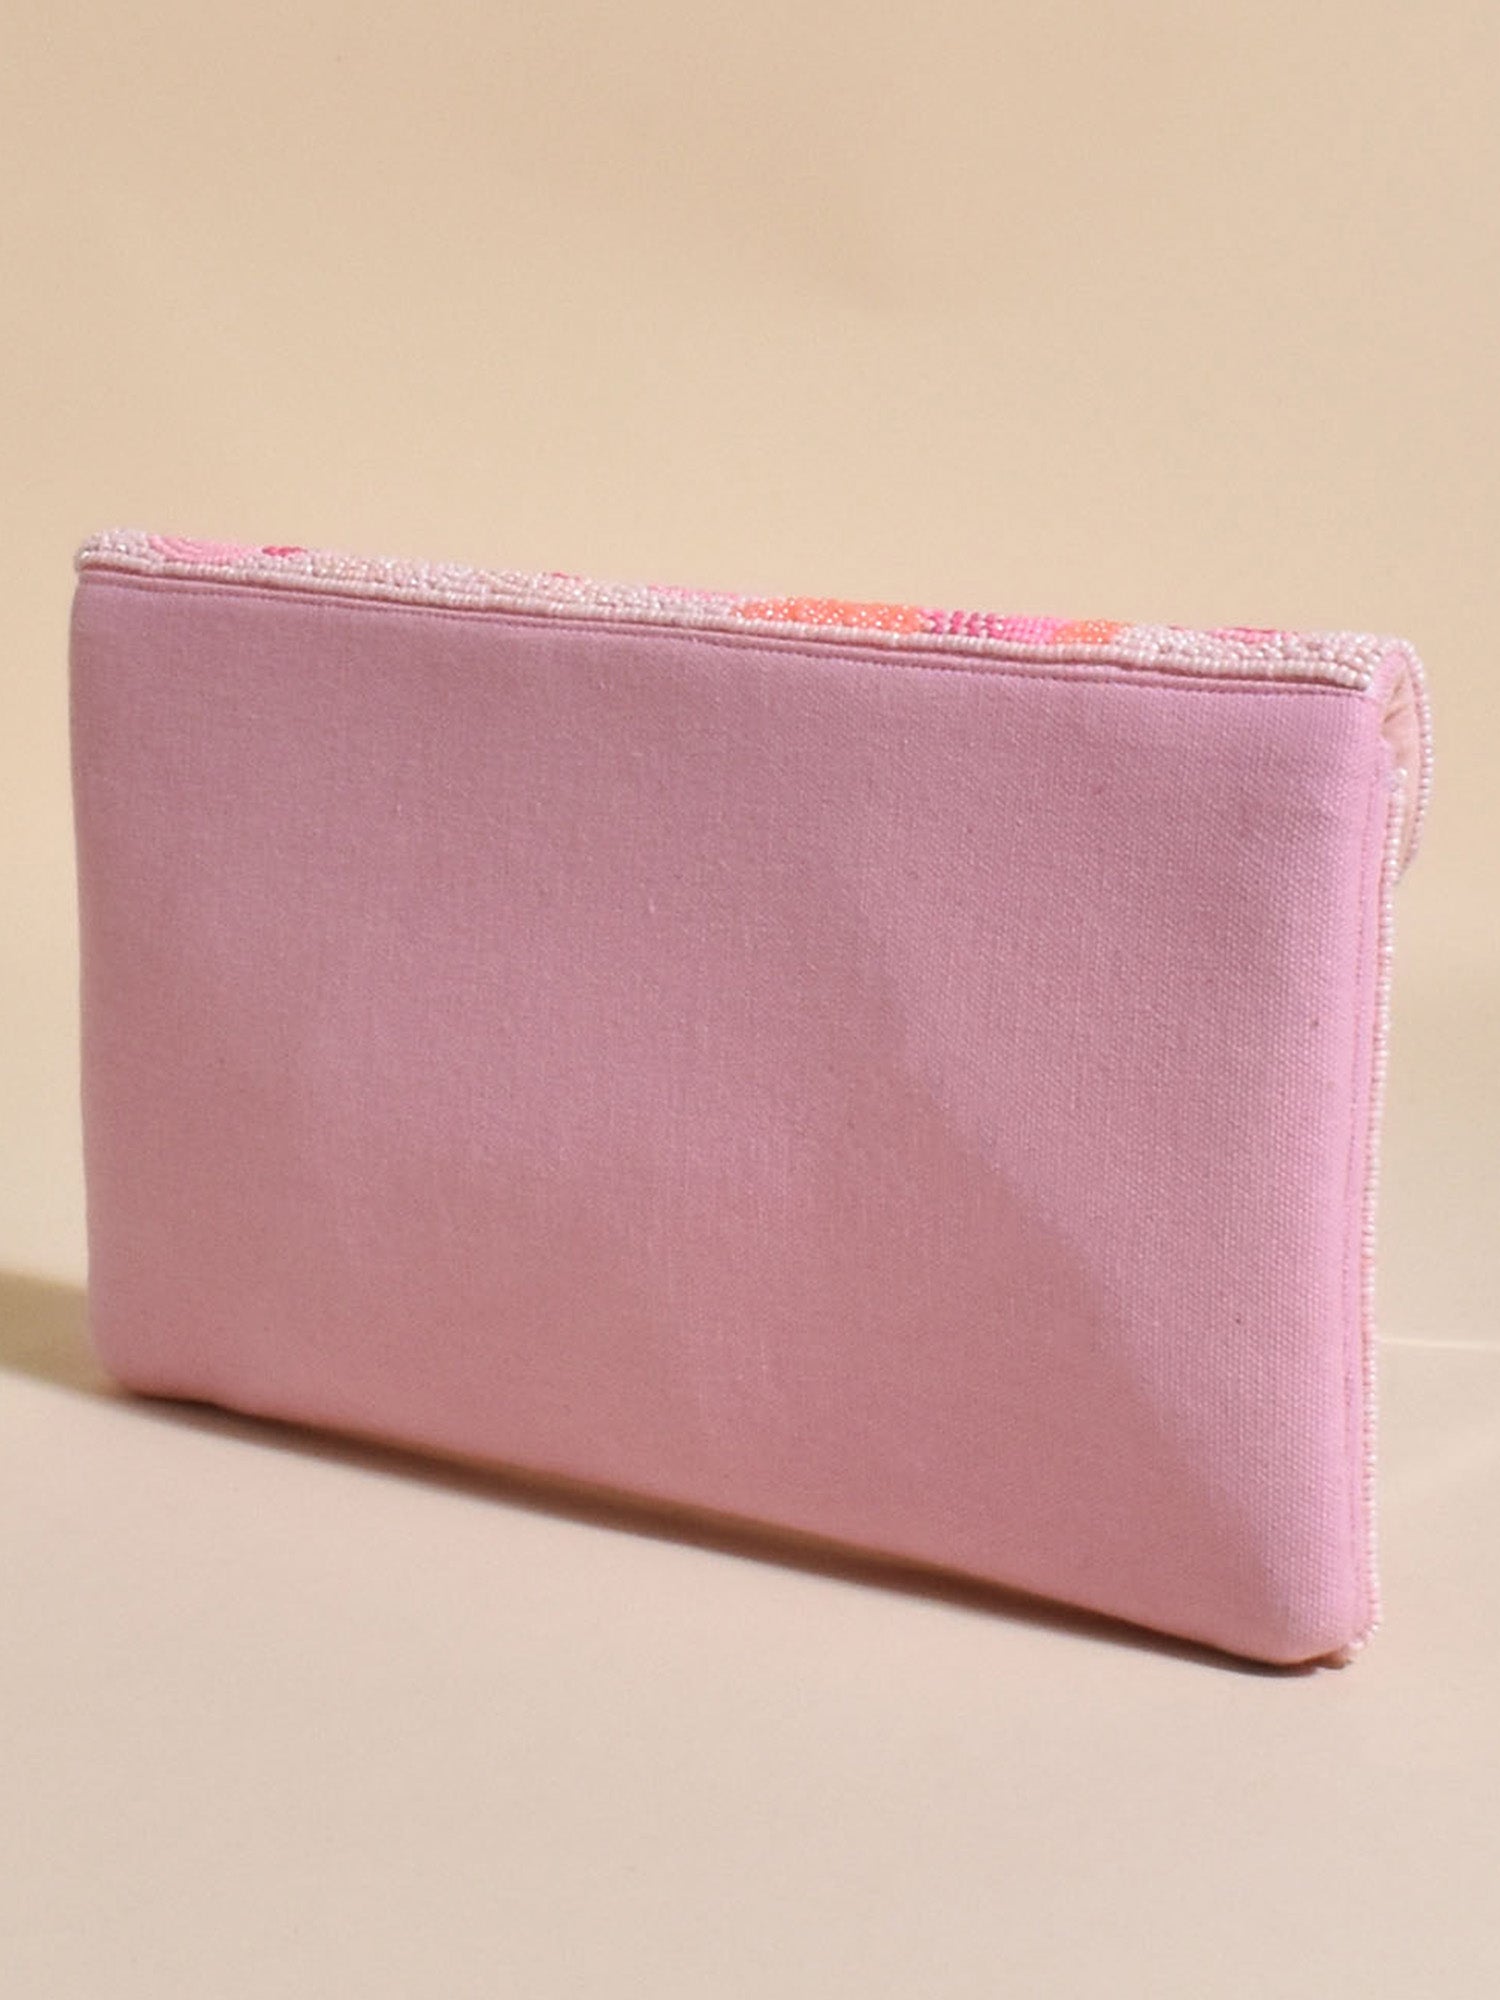 New Hampshire Beaded Clutch - Natural/Pink